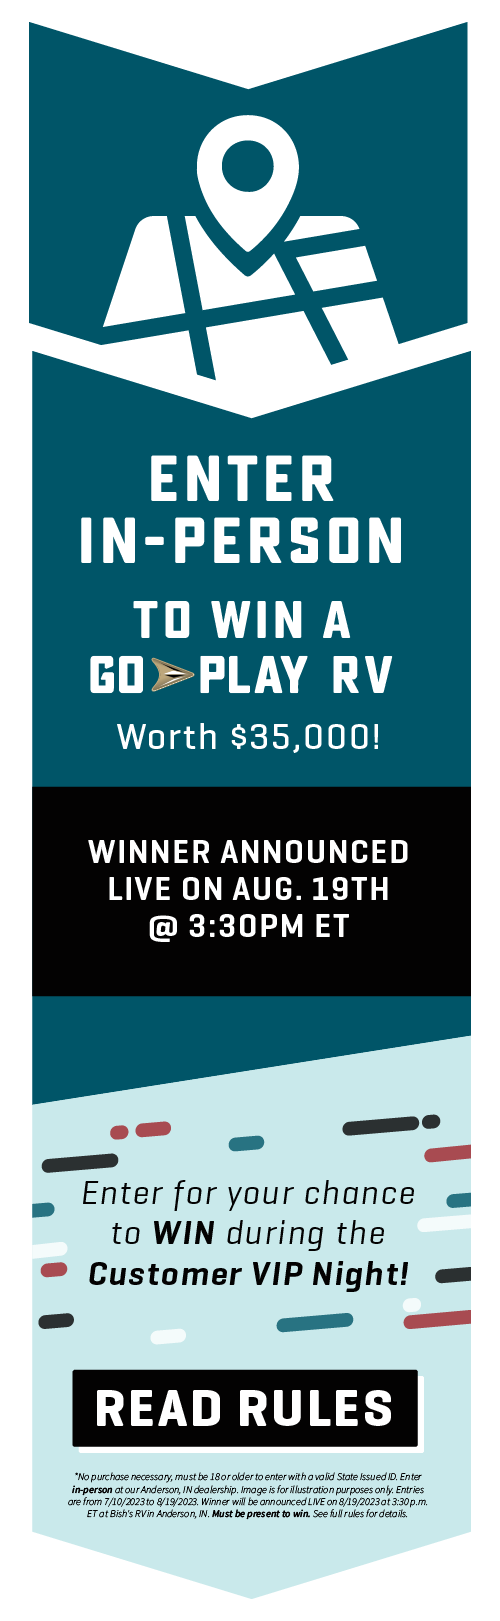 Enter In-Person To Win A Go Play RV - Anderson, IN